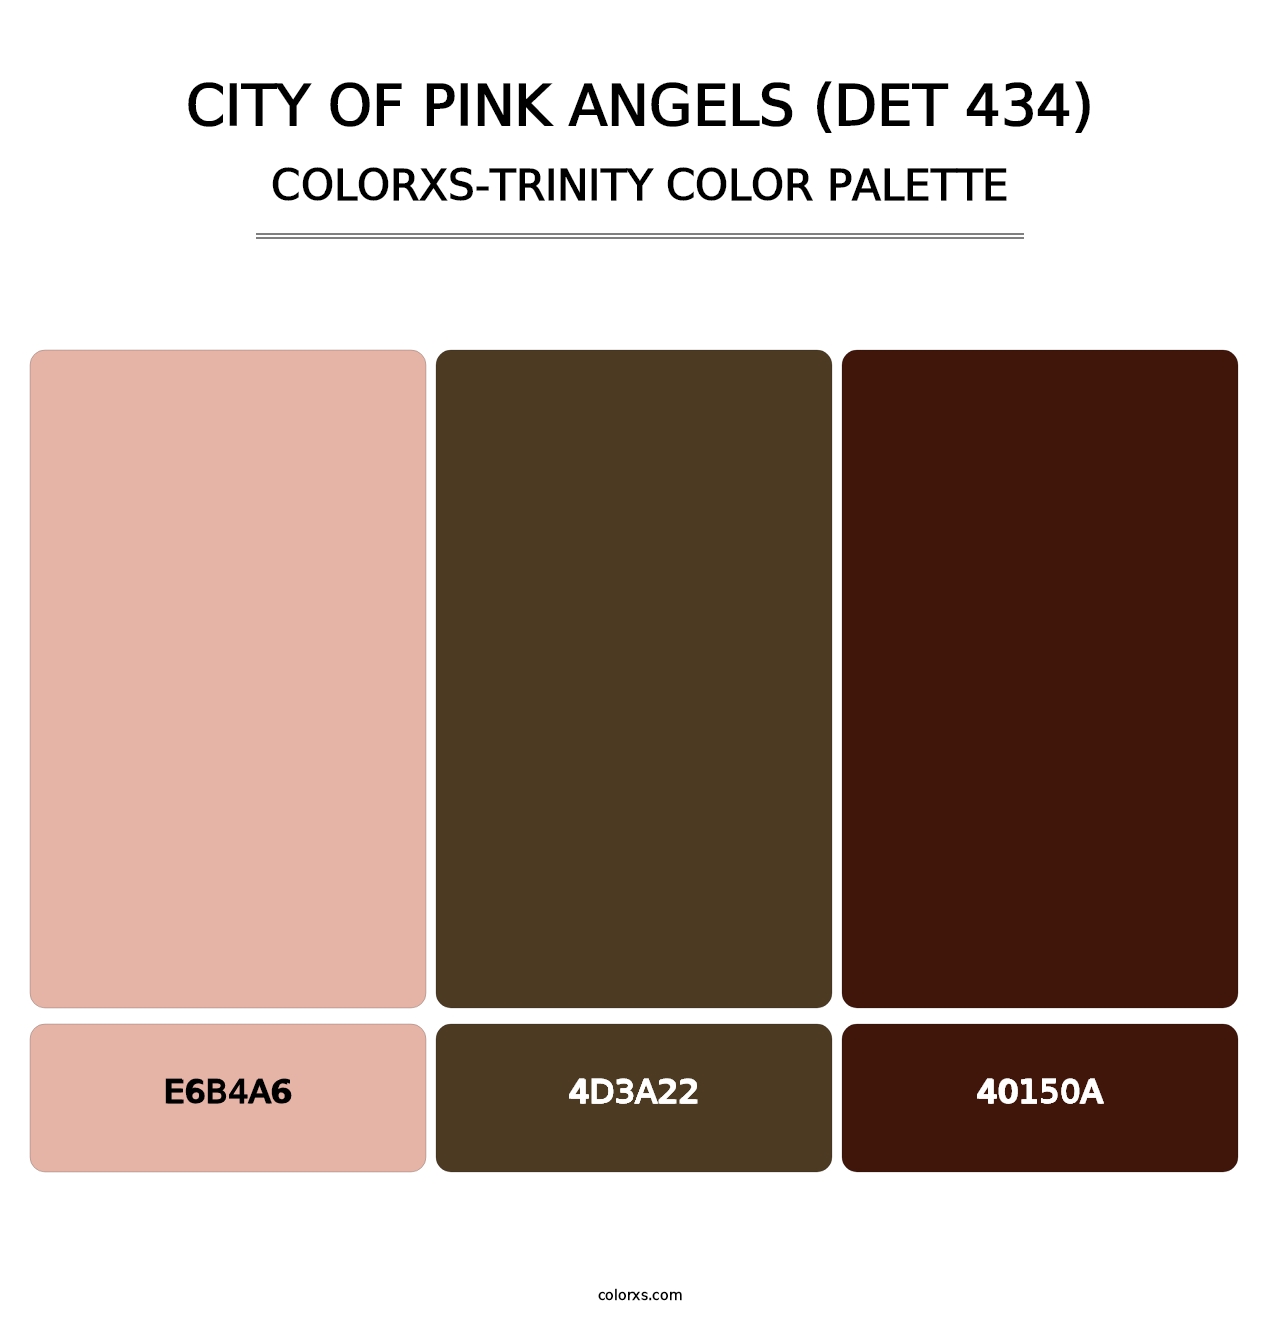 City of Pink Angels (DET 434) - Colorxs Trinity Palette